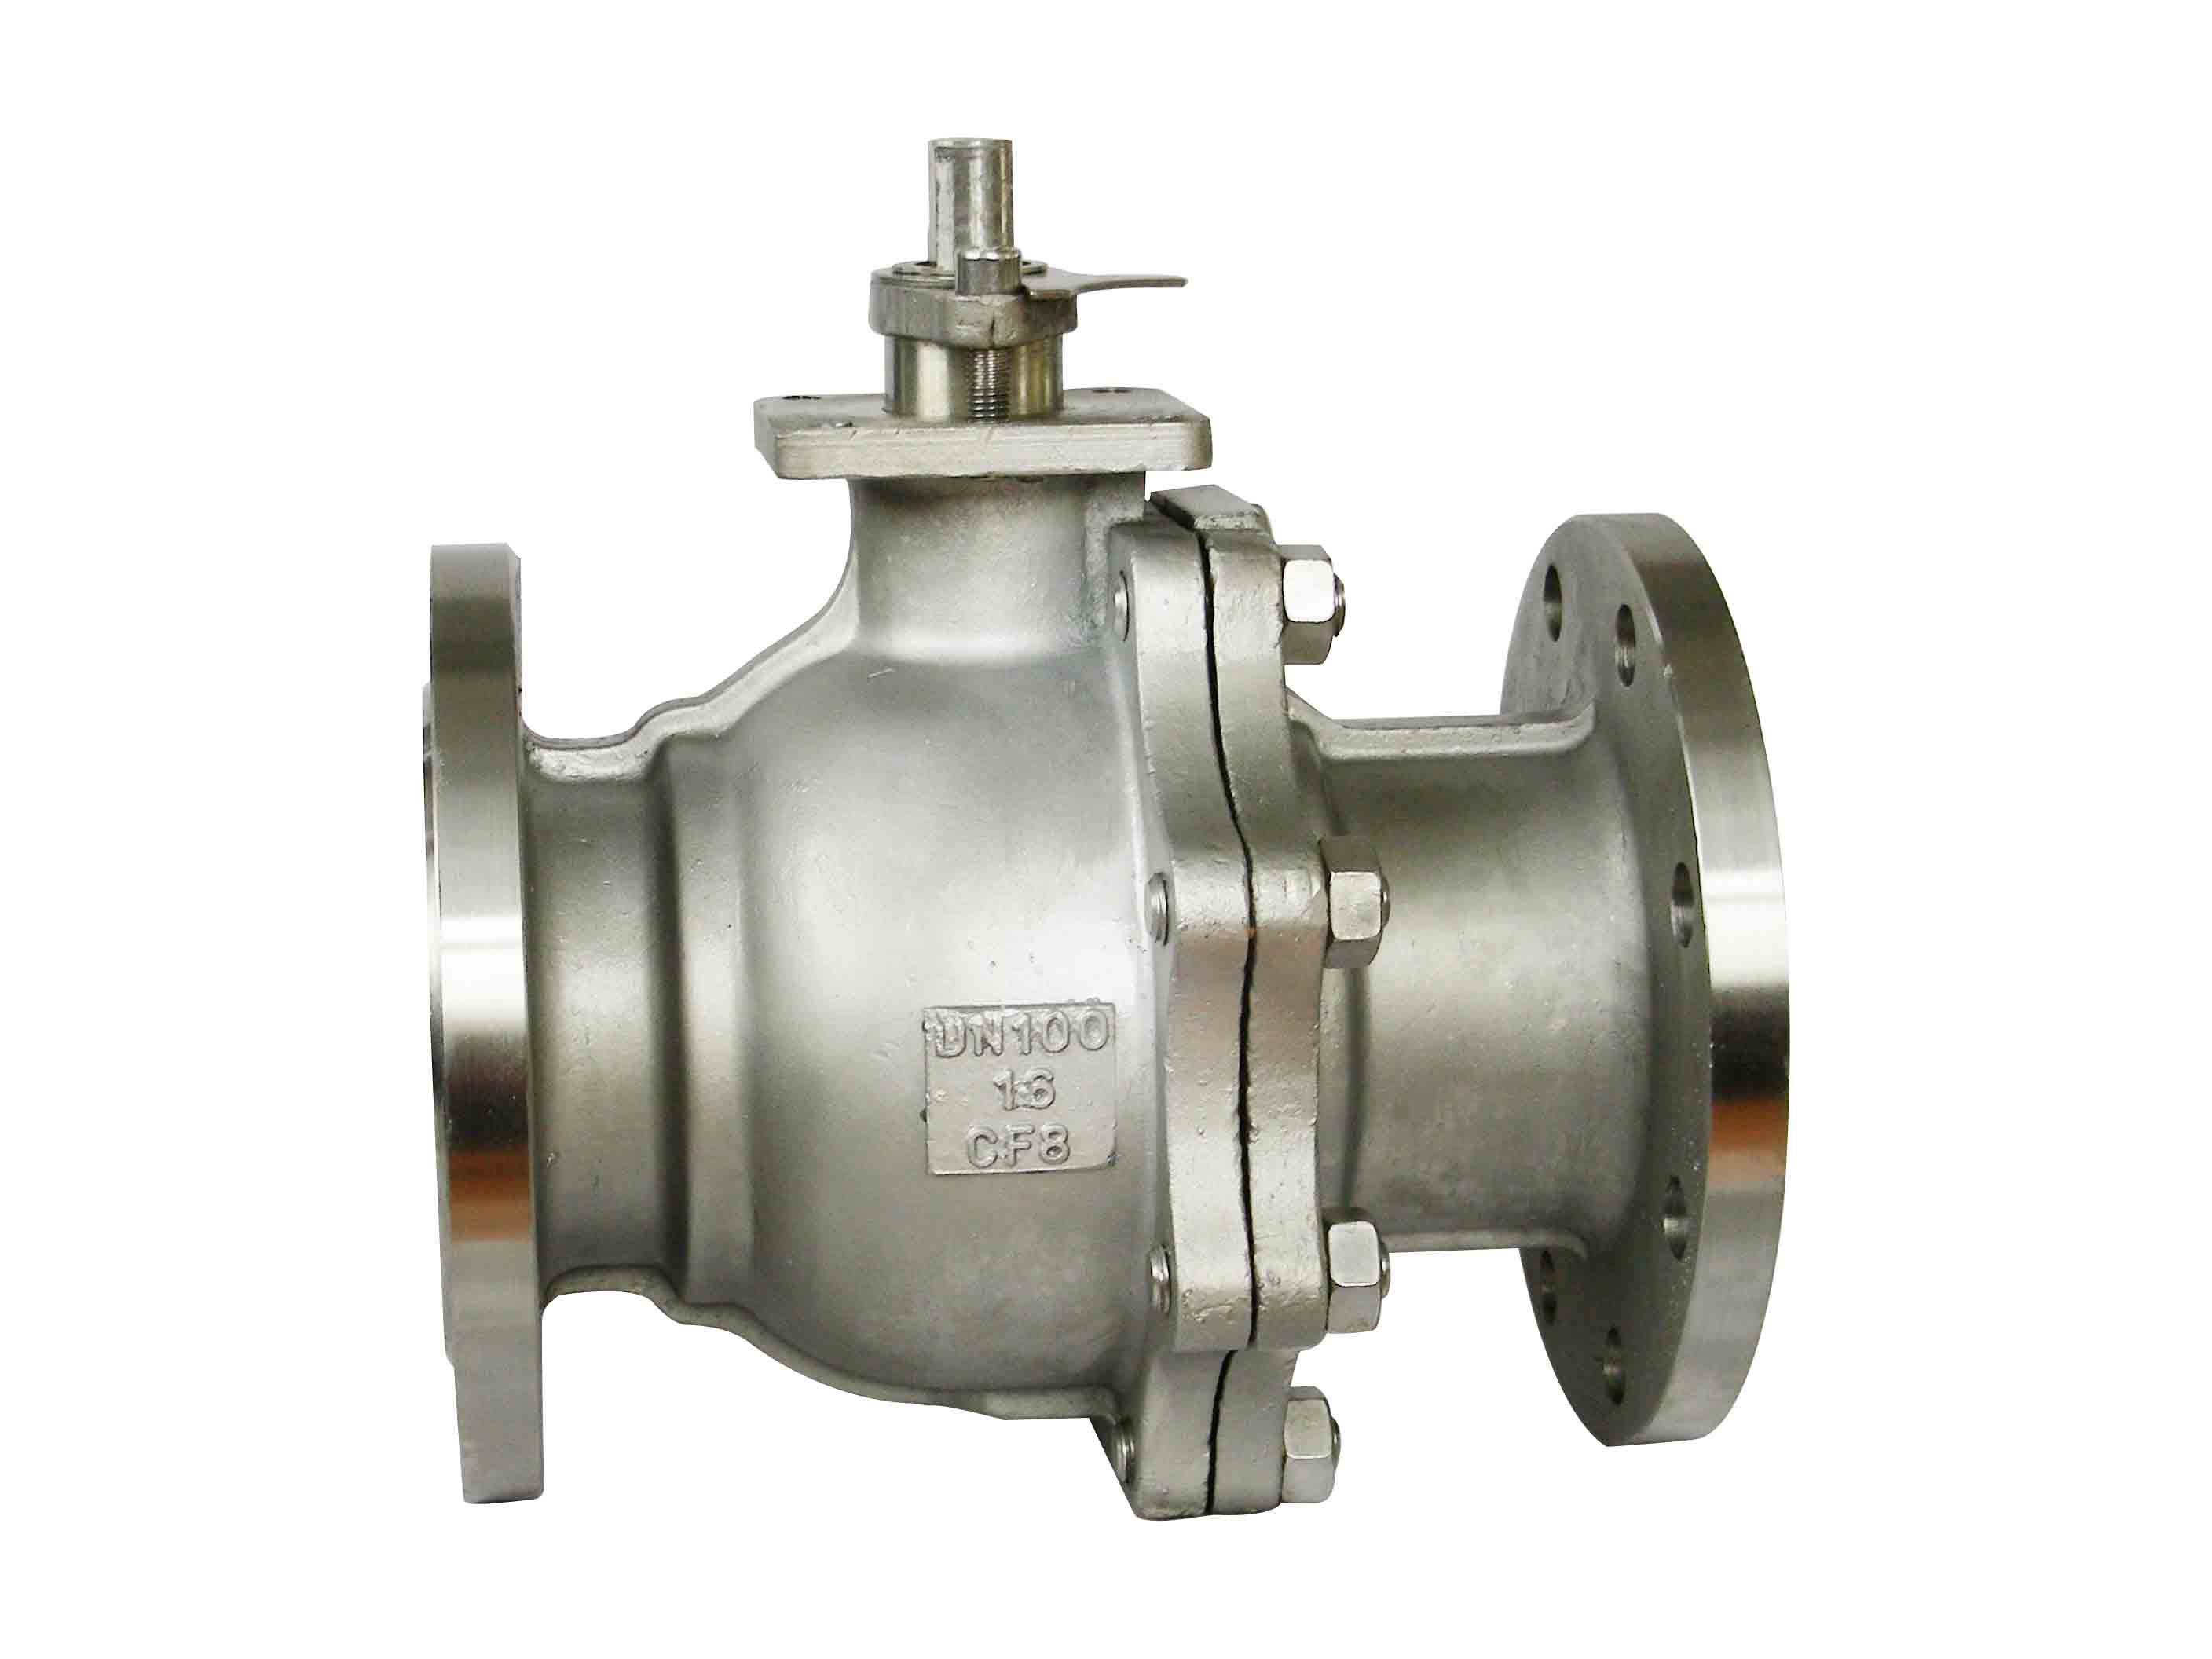 Reduced Bore Floating Ball Valve